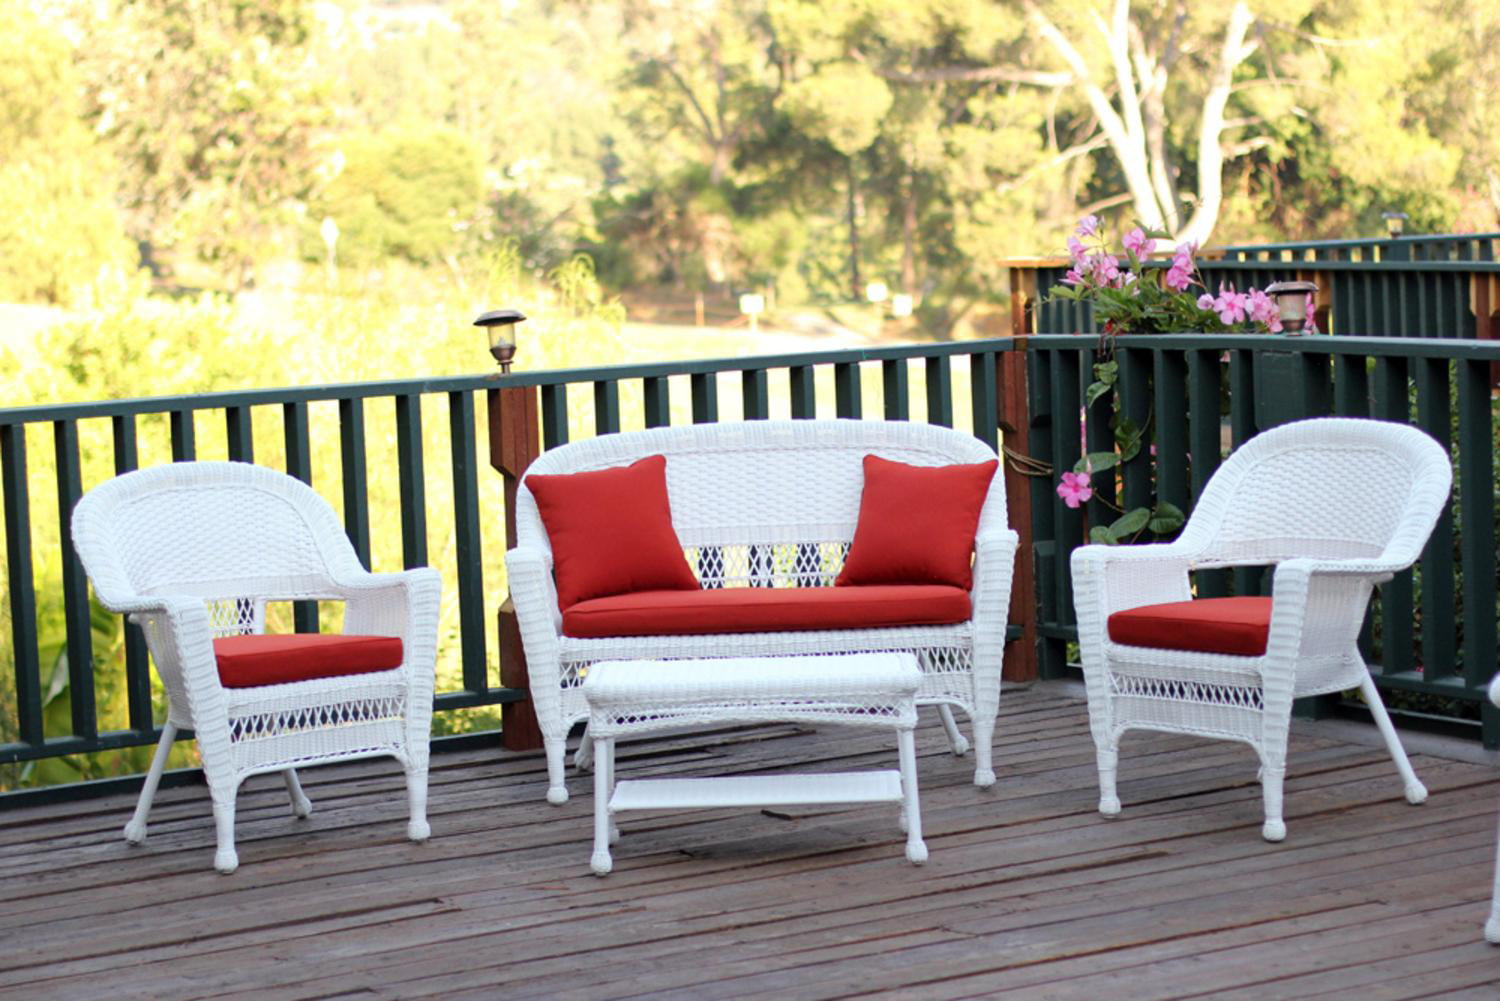 4-Piece White Wicker Patio Chair, Loveseat & Table Furniture Set - Red